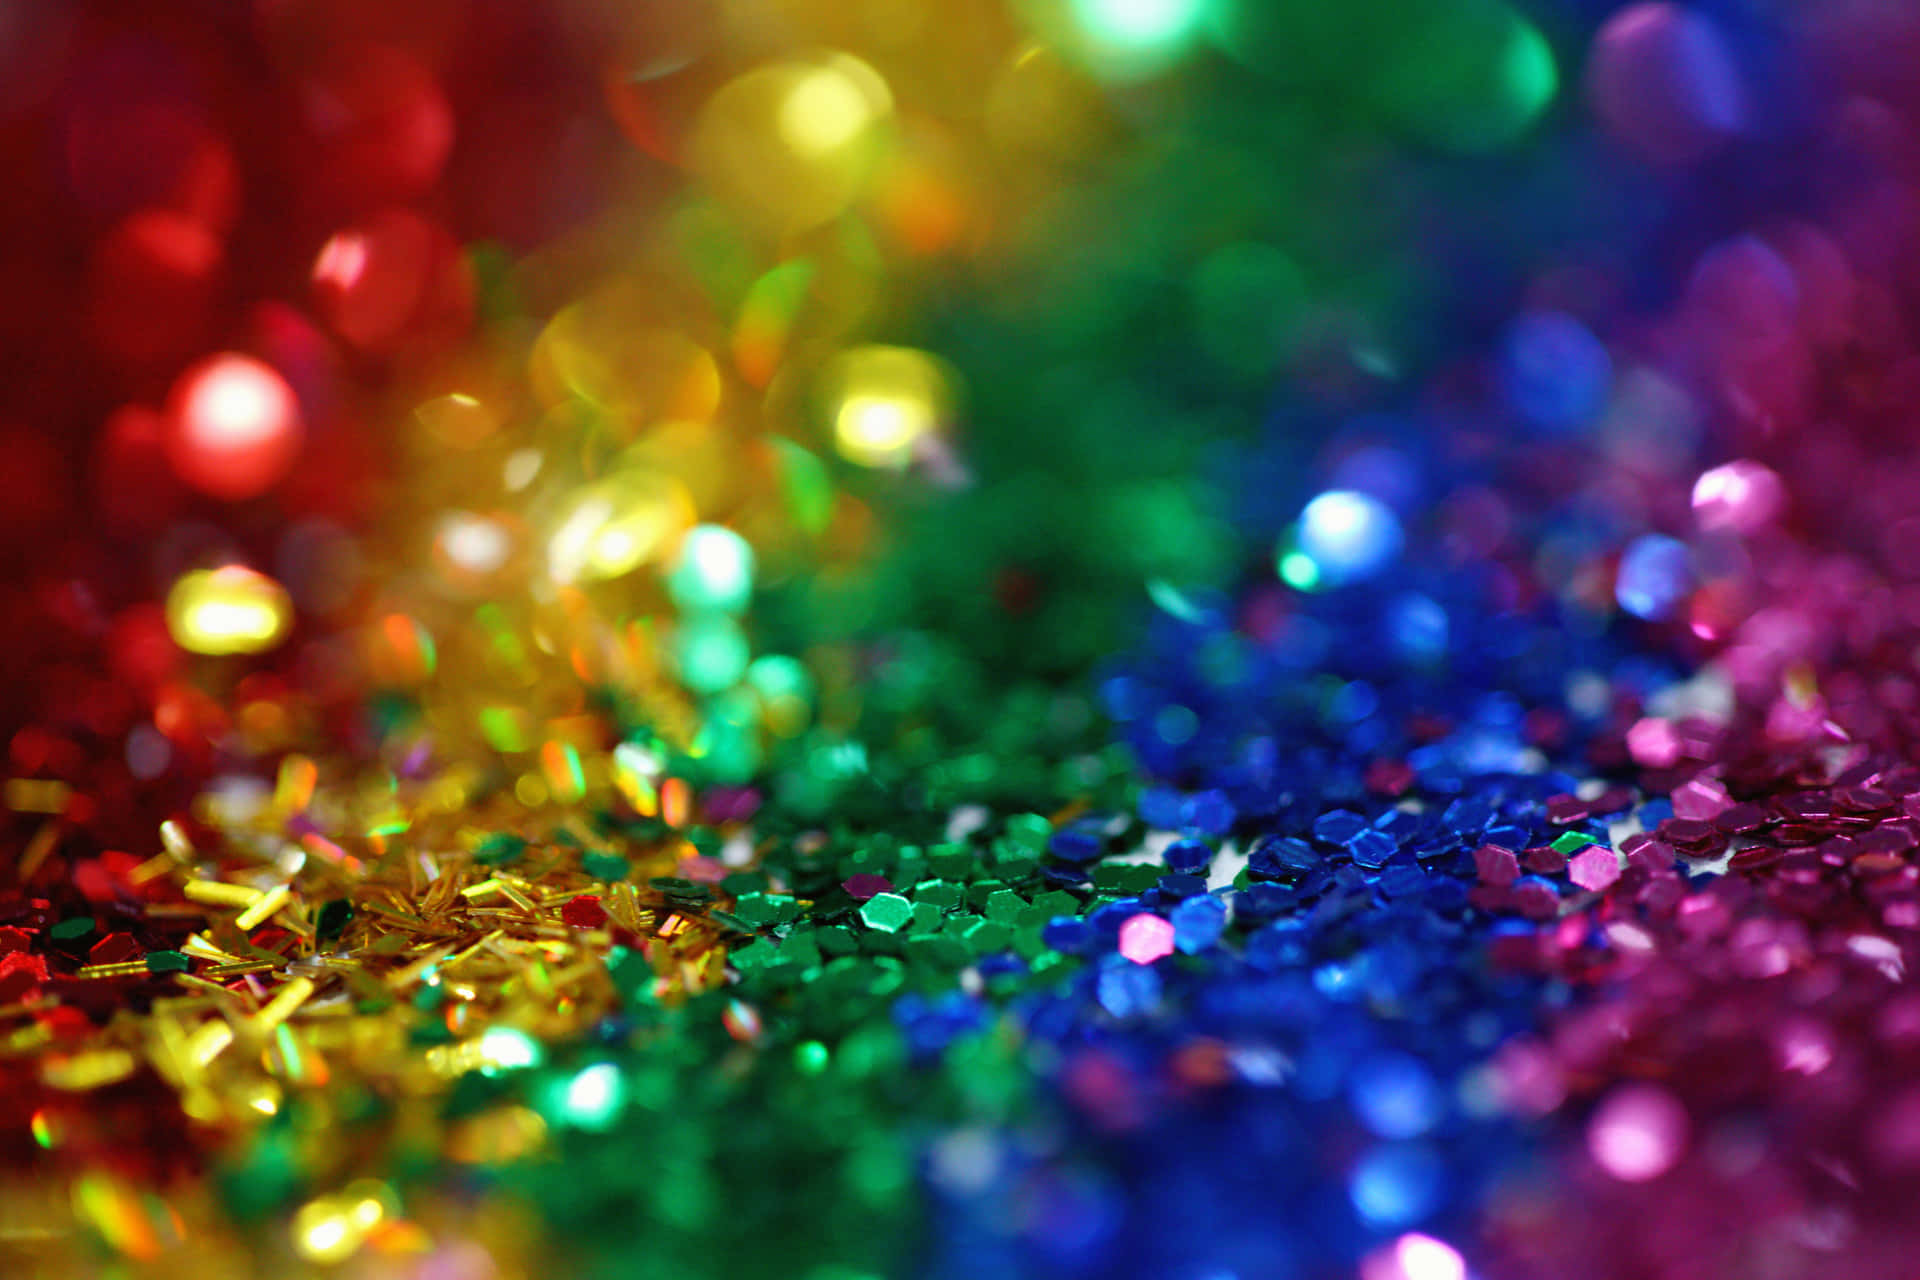 Let your life sparkle with colorful joy! Wallpaper